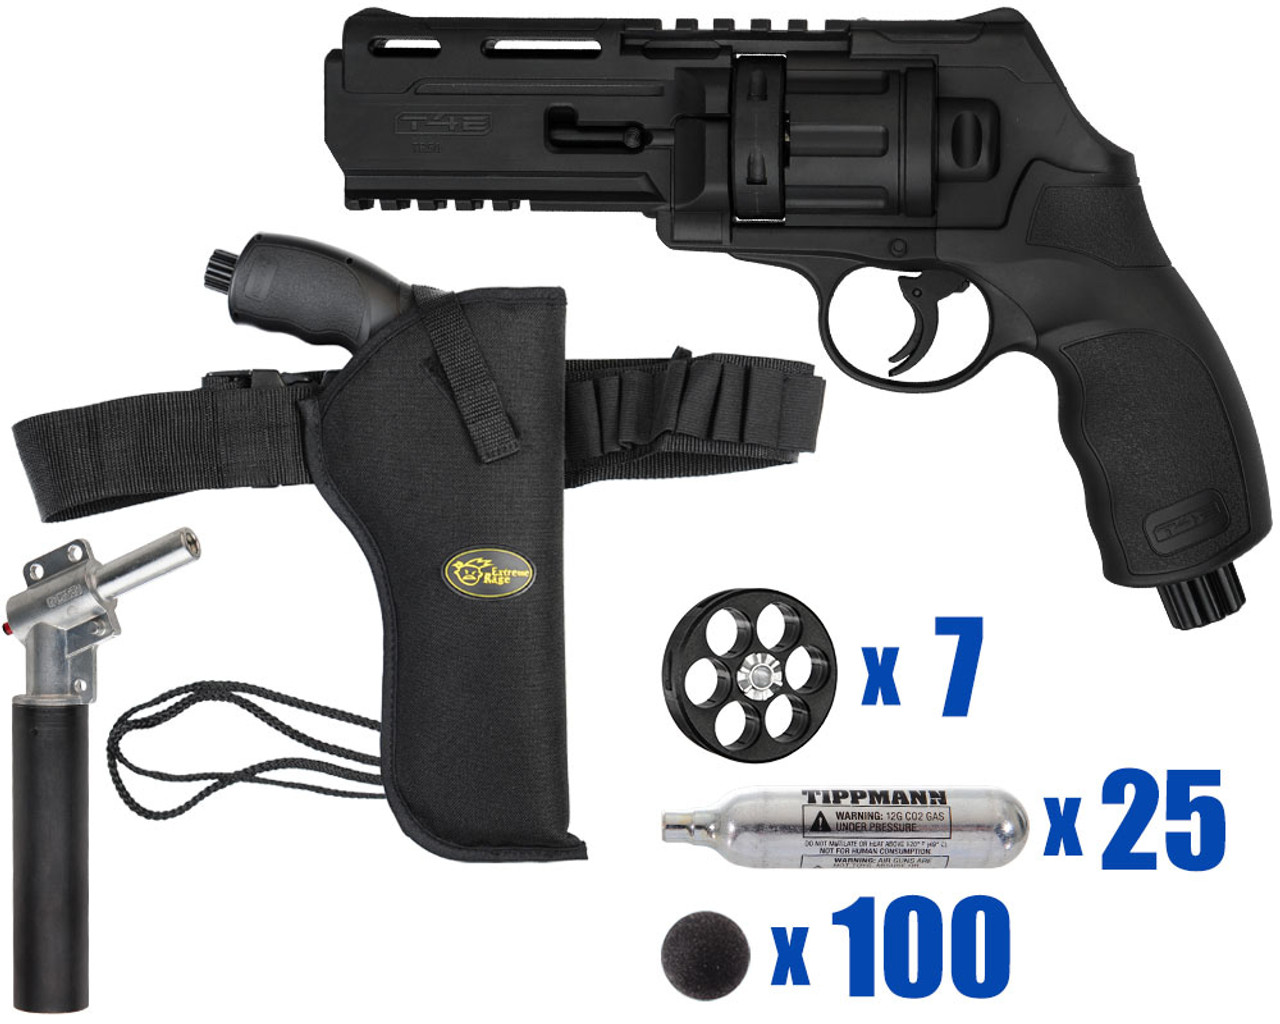 Umarex T4E HDR TR 50 .50Cal Paintball Marker - Low Power